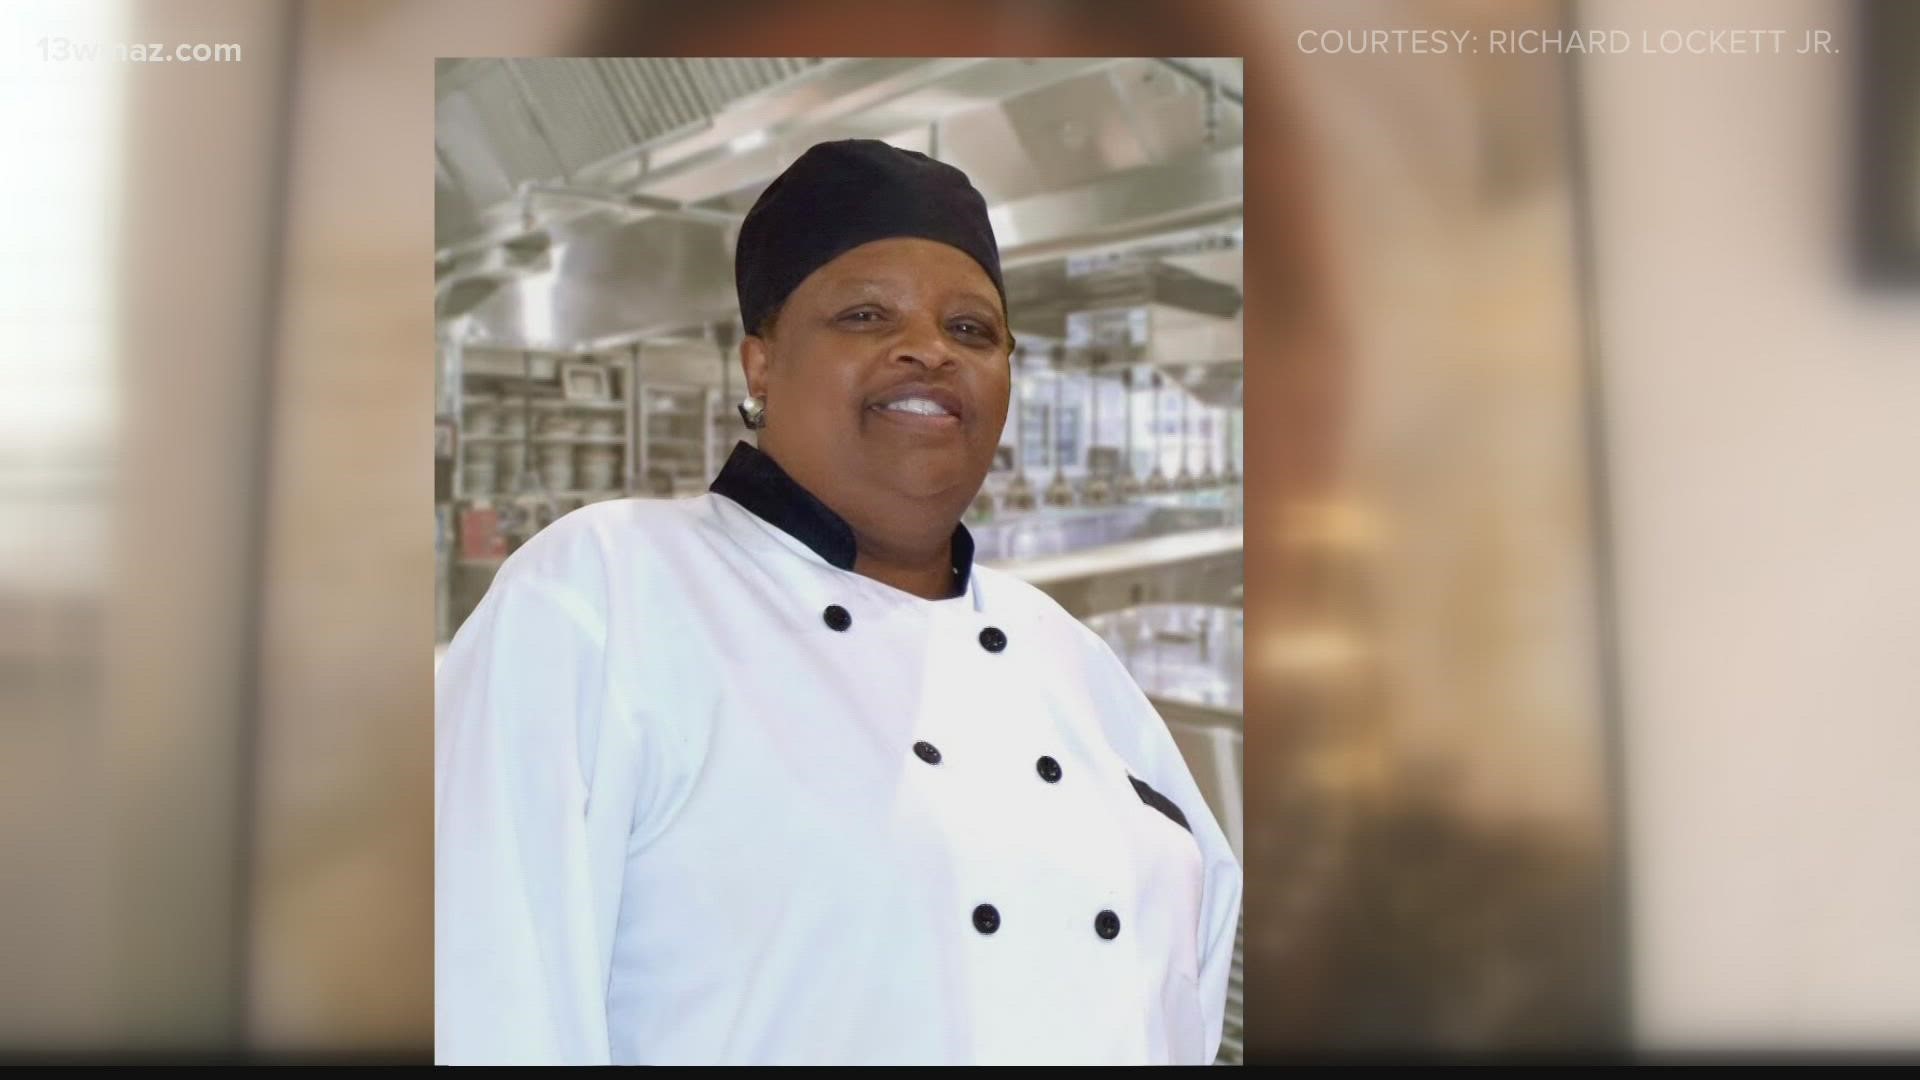 Alfreda 'MeMaw' Lockett was the mind behind MeMaw's at LG's restaurant. Her family says she spread her love through cooking.